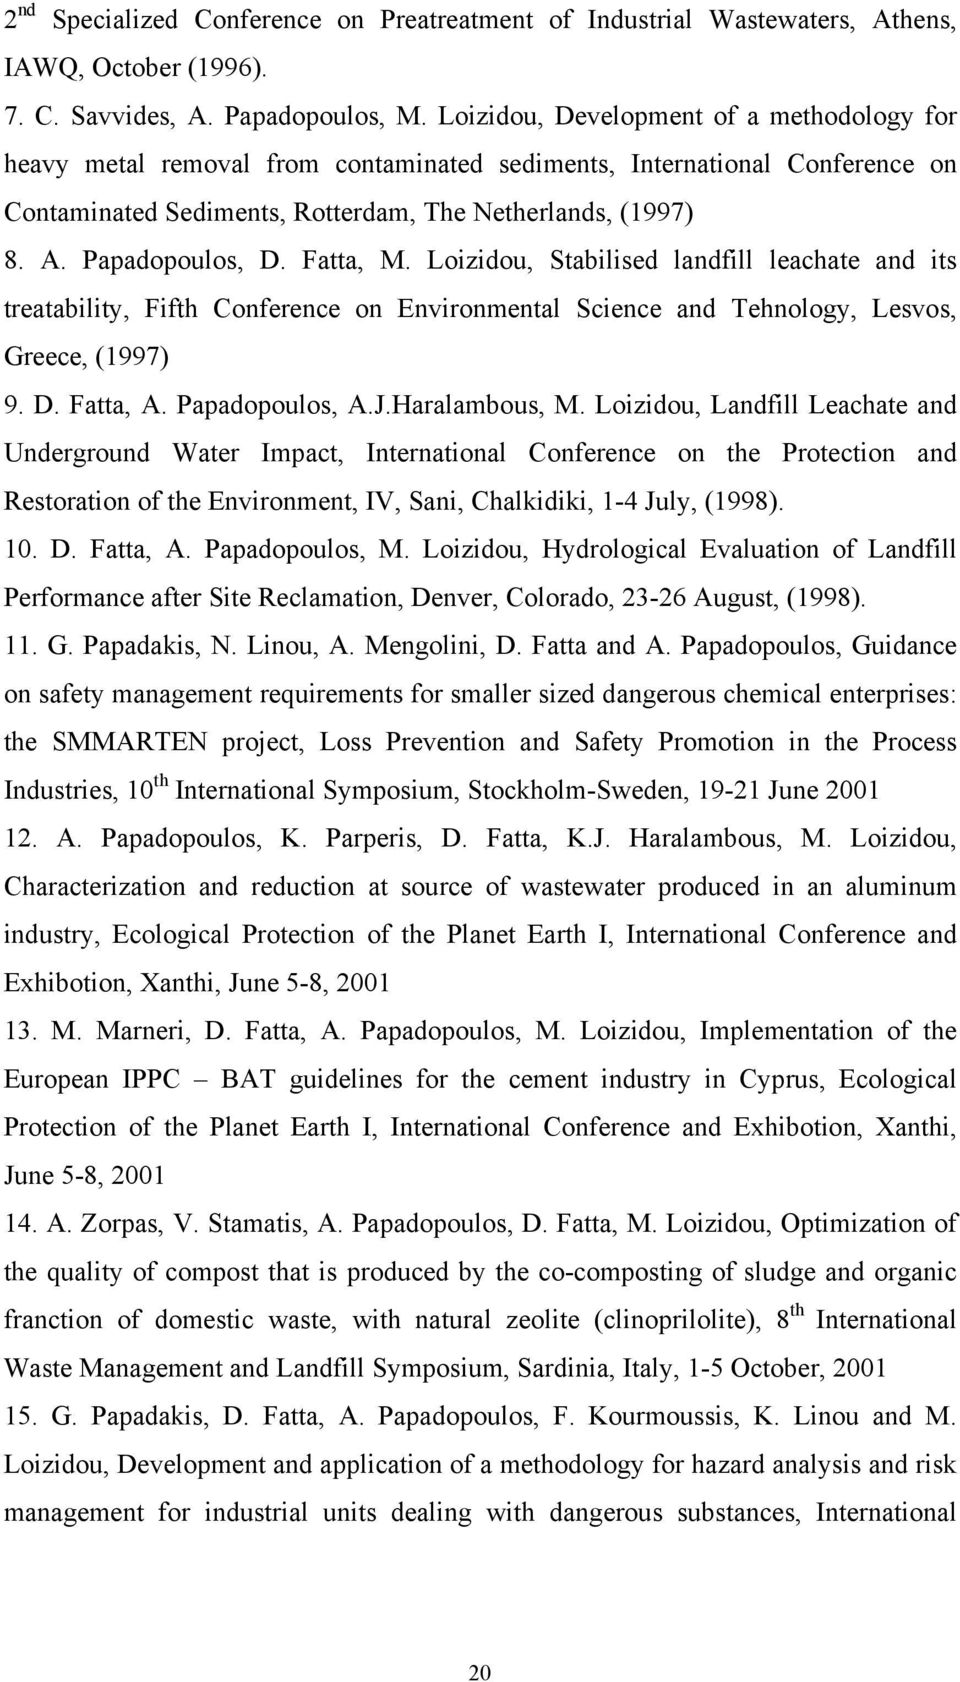 Papadopoulos, D. Fatta, M. Loizidou, Stabilised landfill leachate and its treatability, Fifth Conference on Environmental Science and Tehnology, Lesvos, Greece, (1997) 9. D. Fatta, A. Papadopoulos, A.